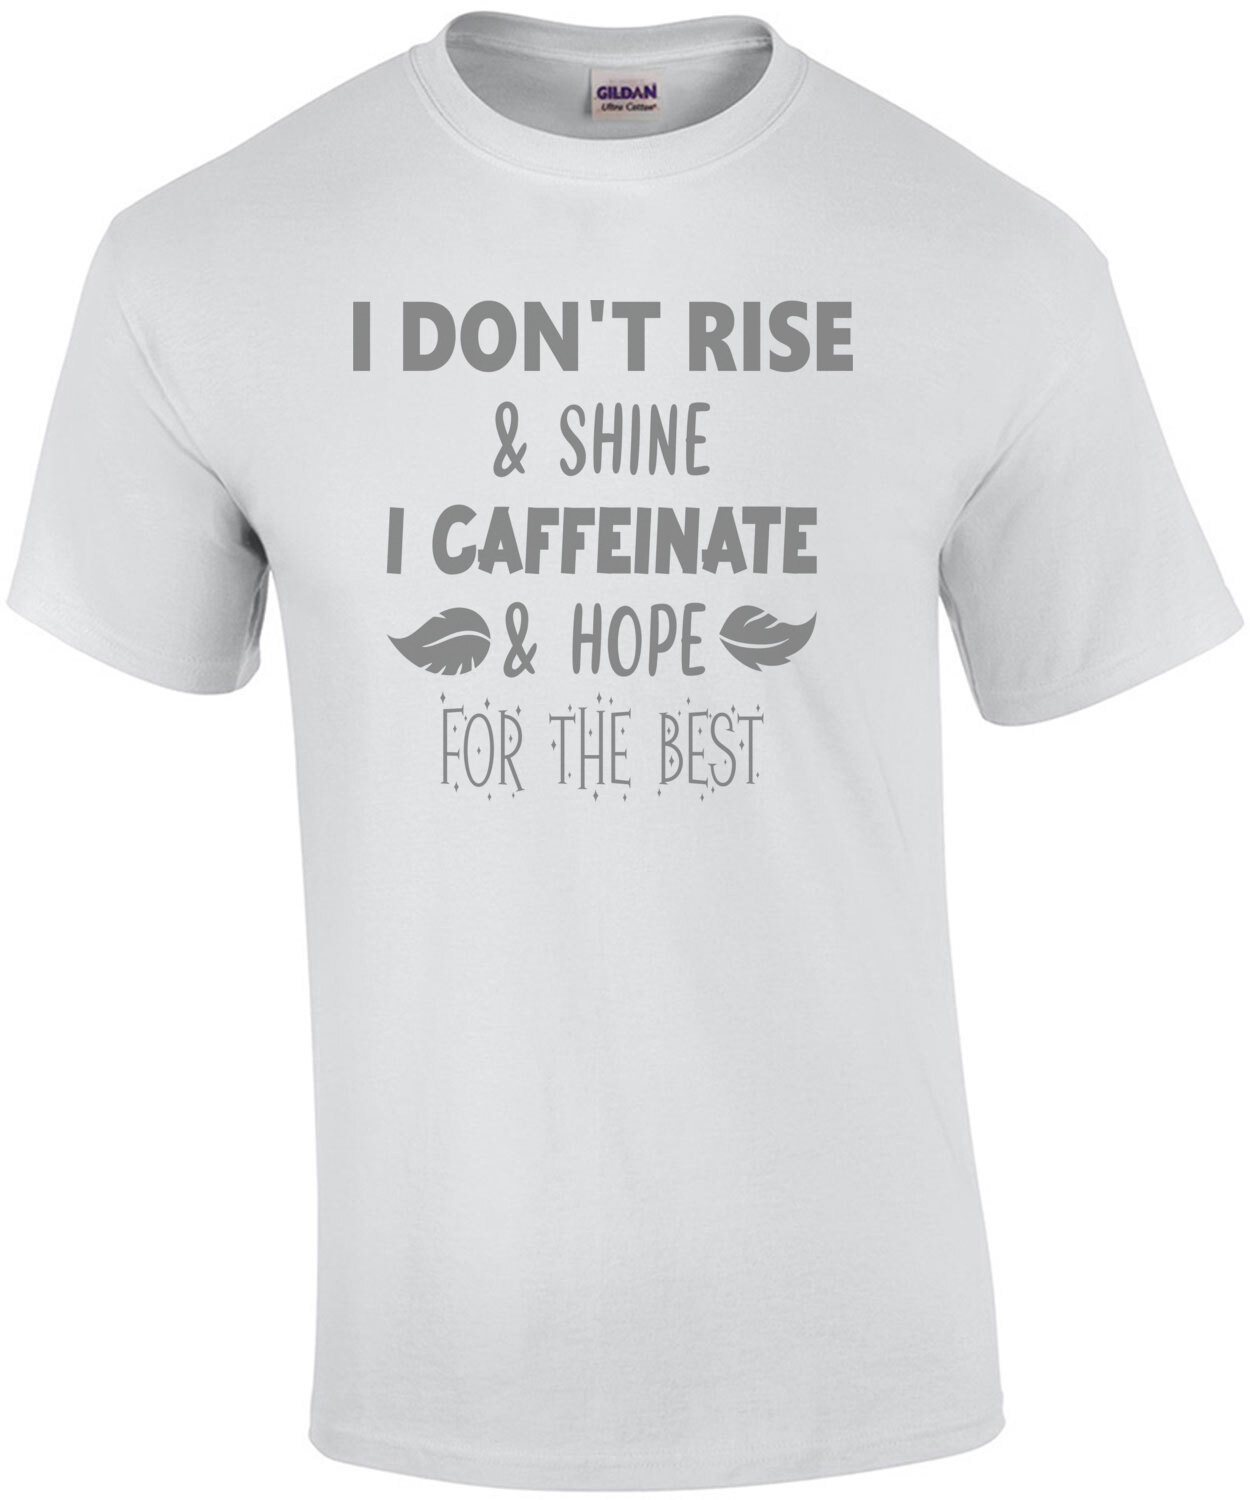 I don't rise and shine I caffeinate and hope for the best - funny coffee t-shirt